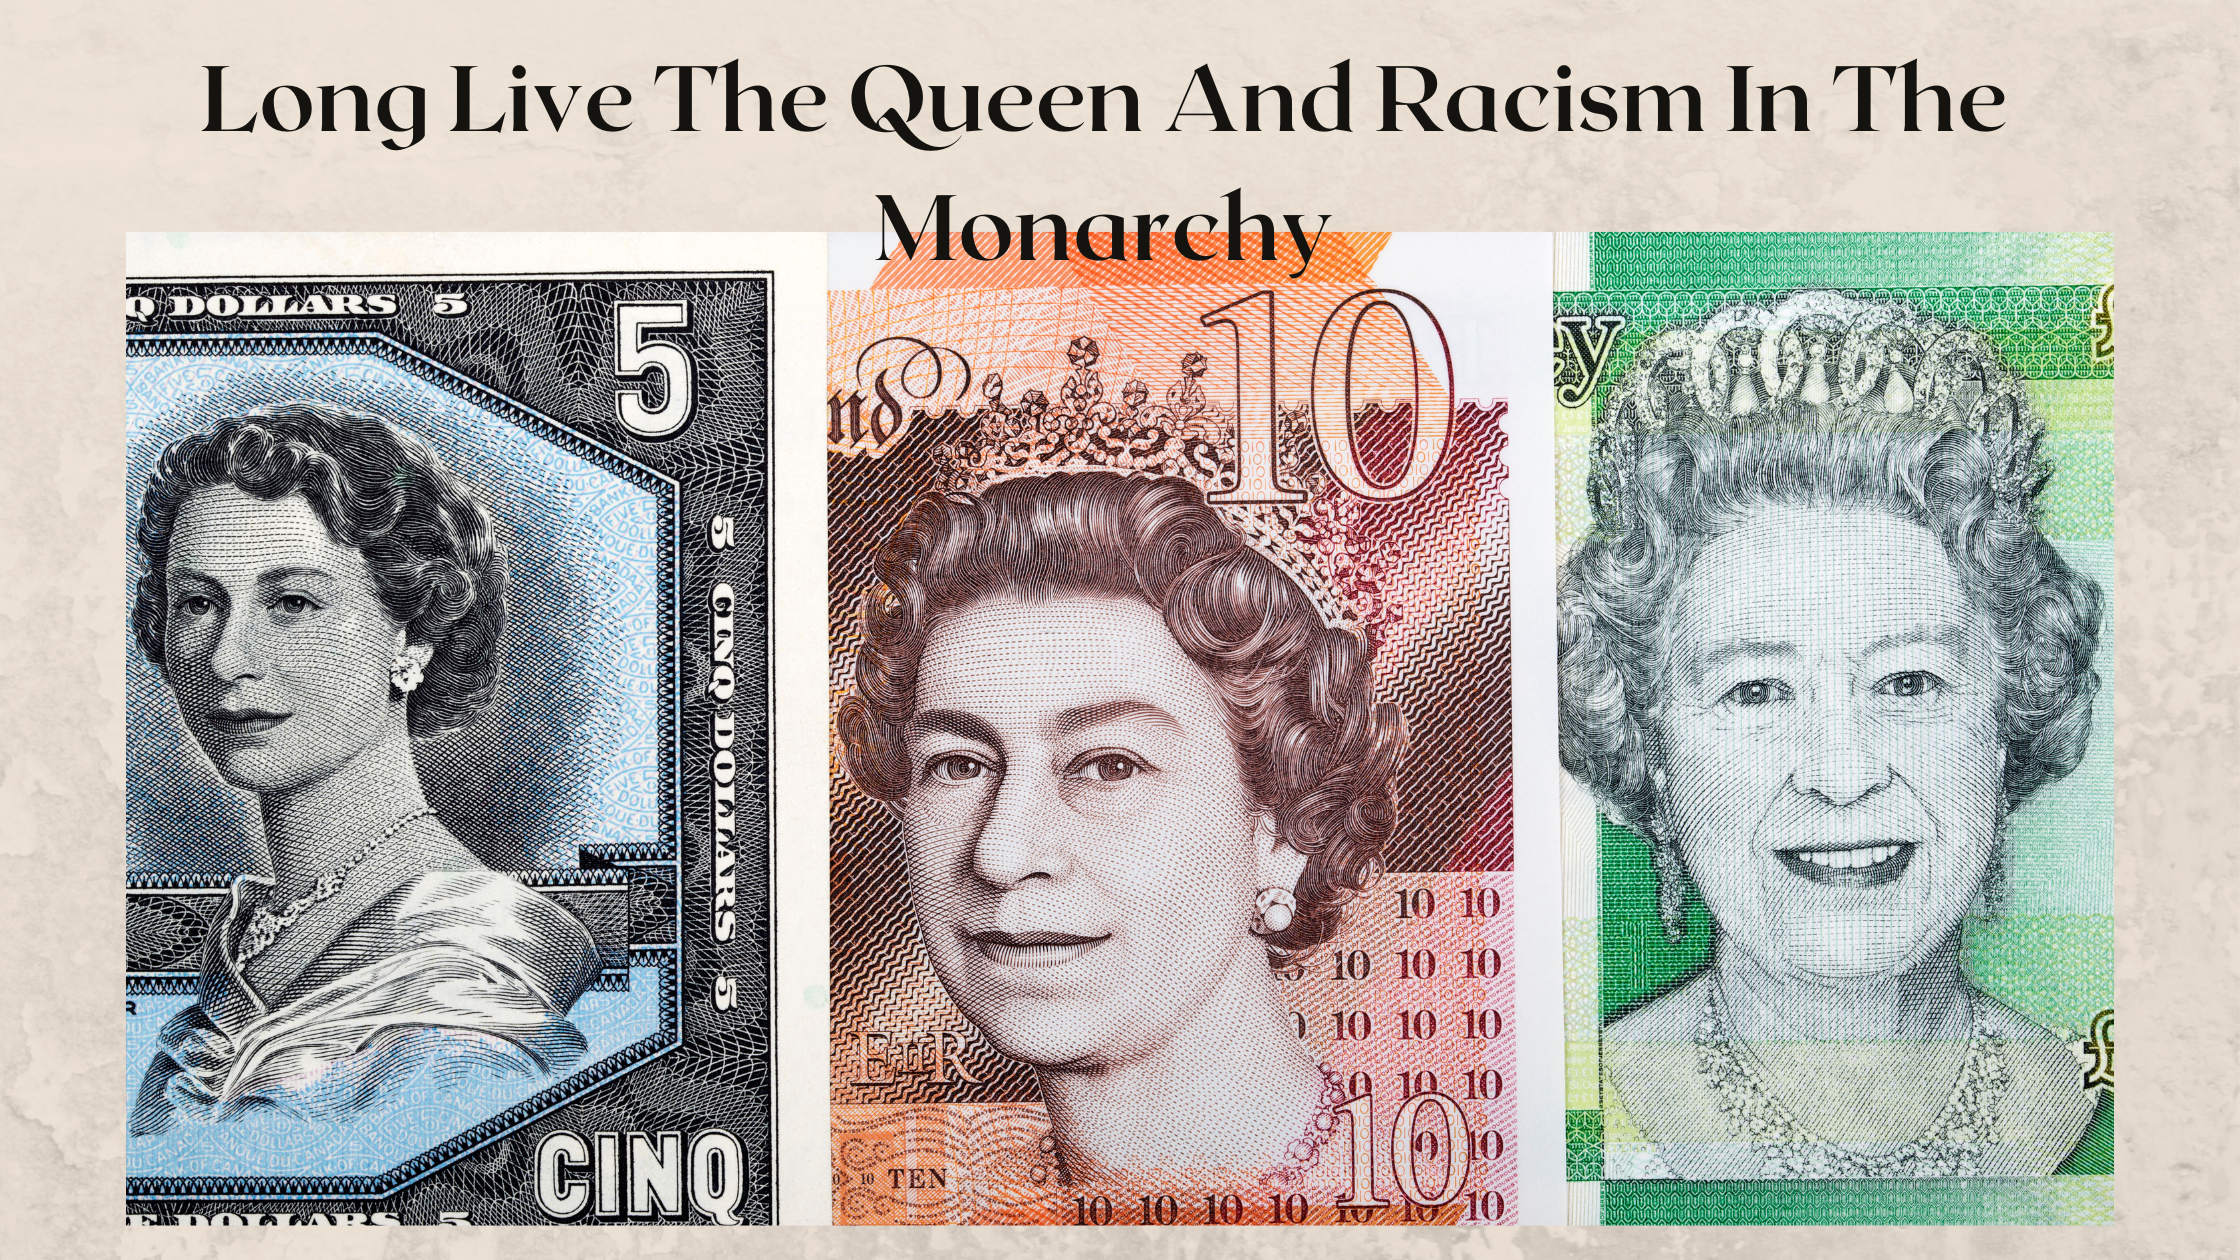 Long Live The Queen And Racism In The Monarchy